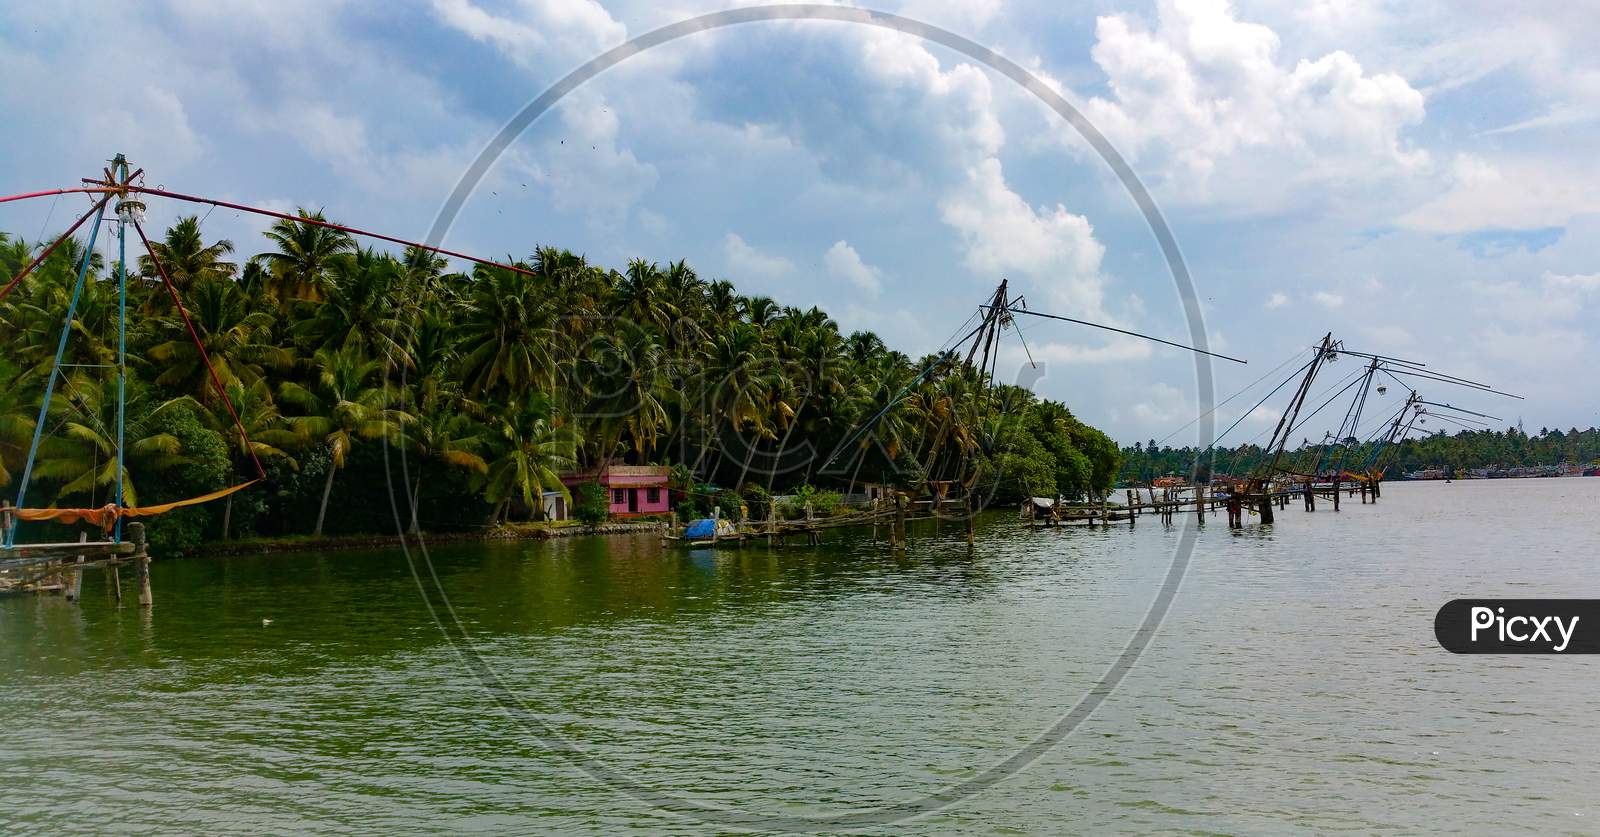 Chinese fishing nets in the backwaters of kerala